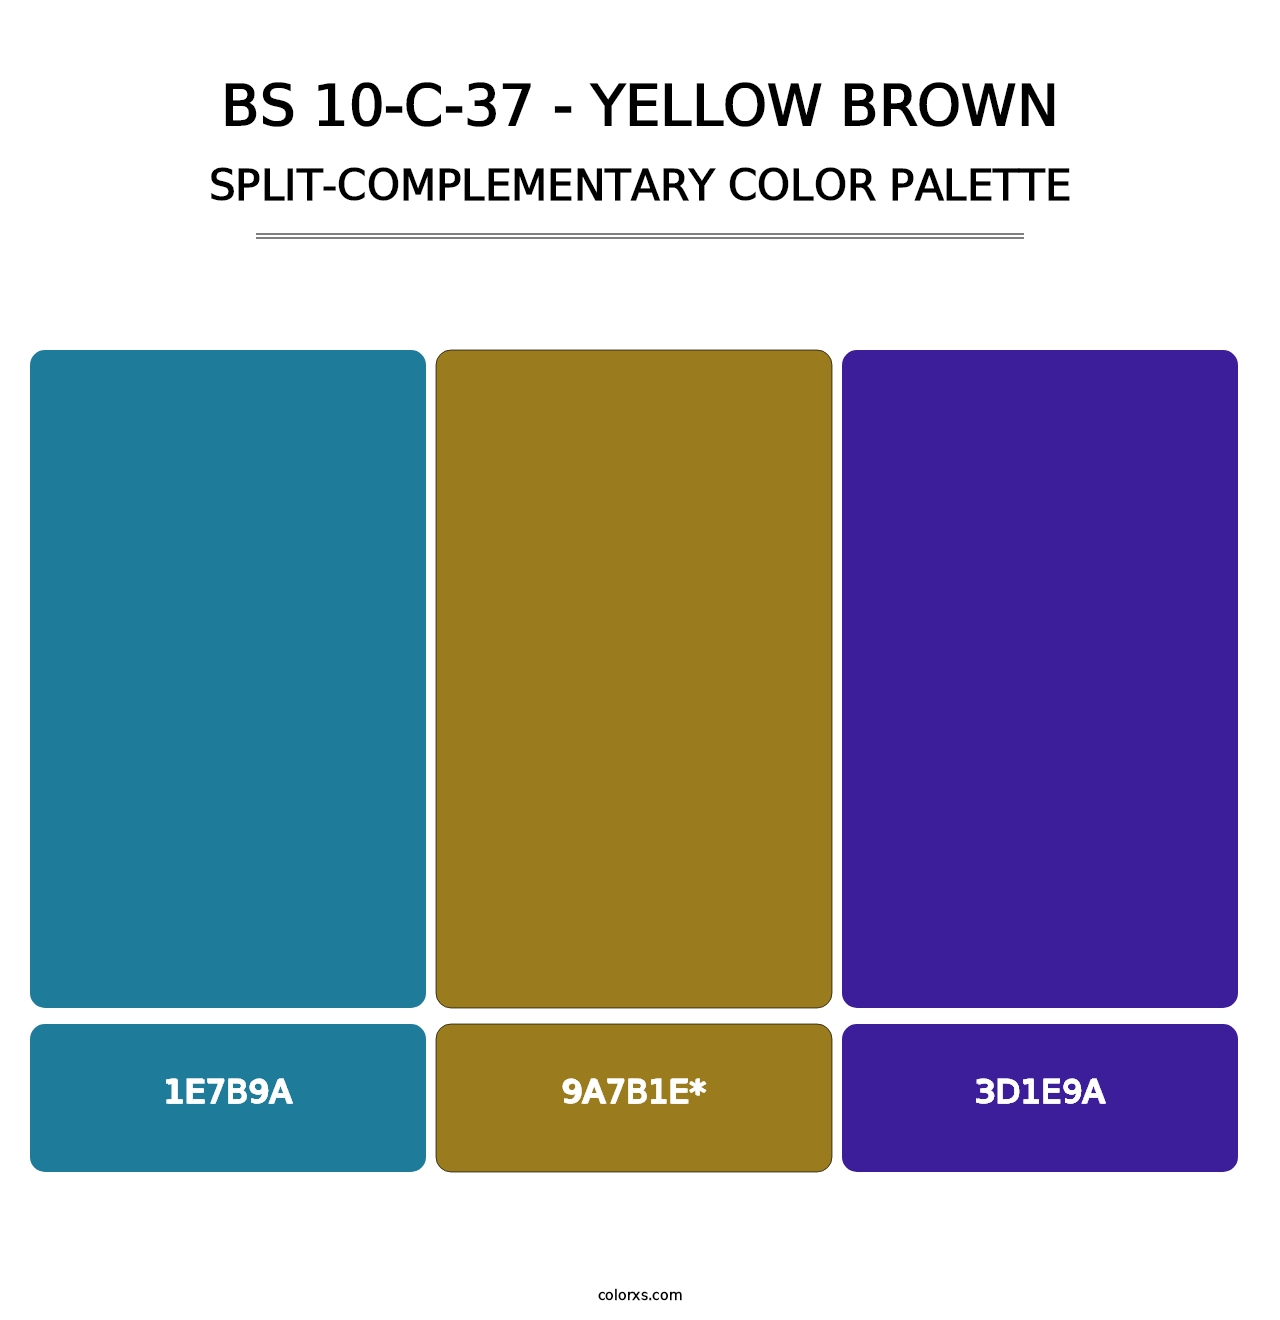 BS 10-C-37 - Yellow Brown - Split-Complementary Color Palette